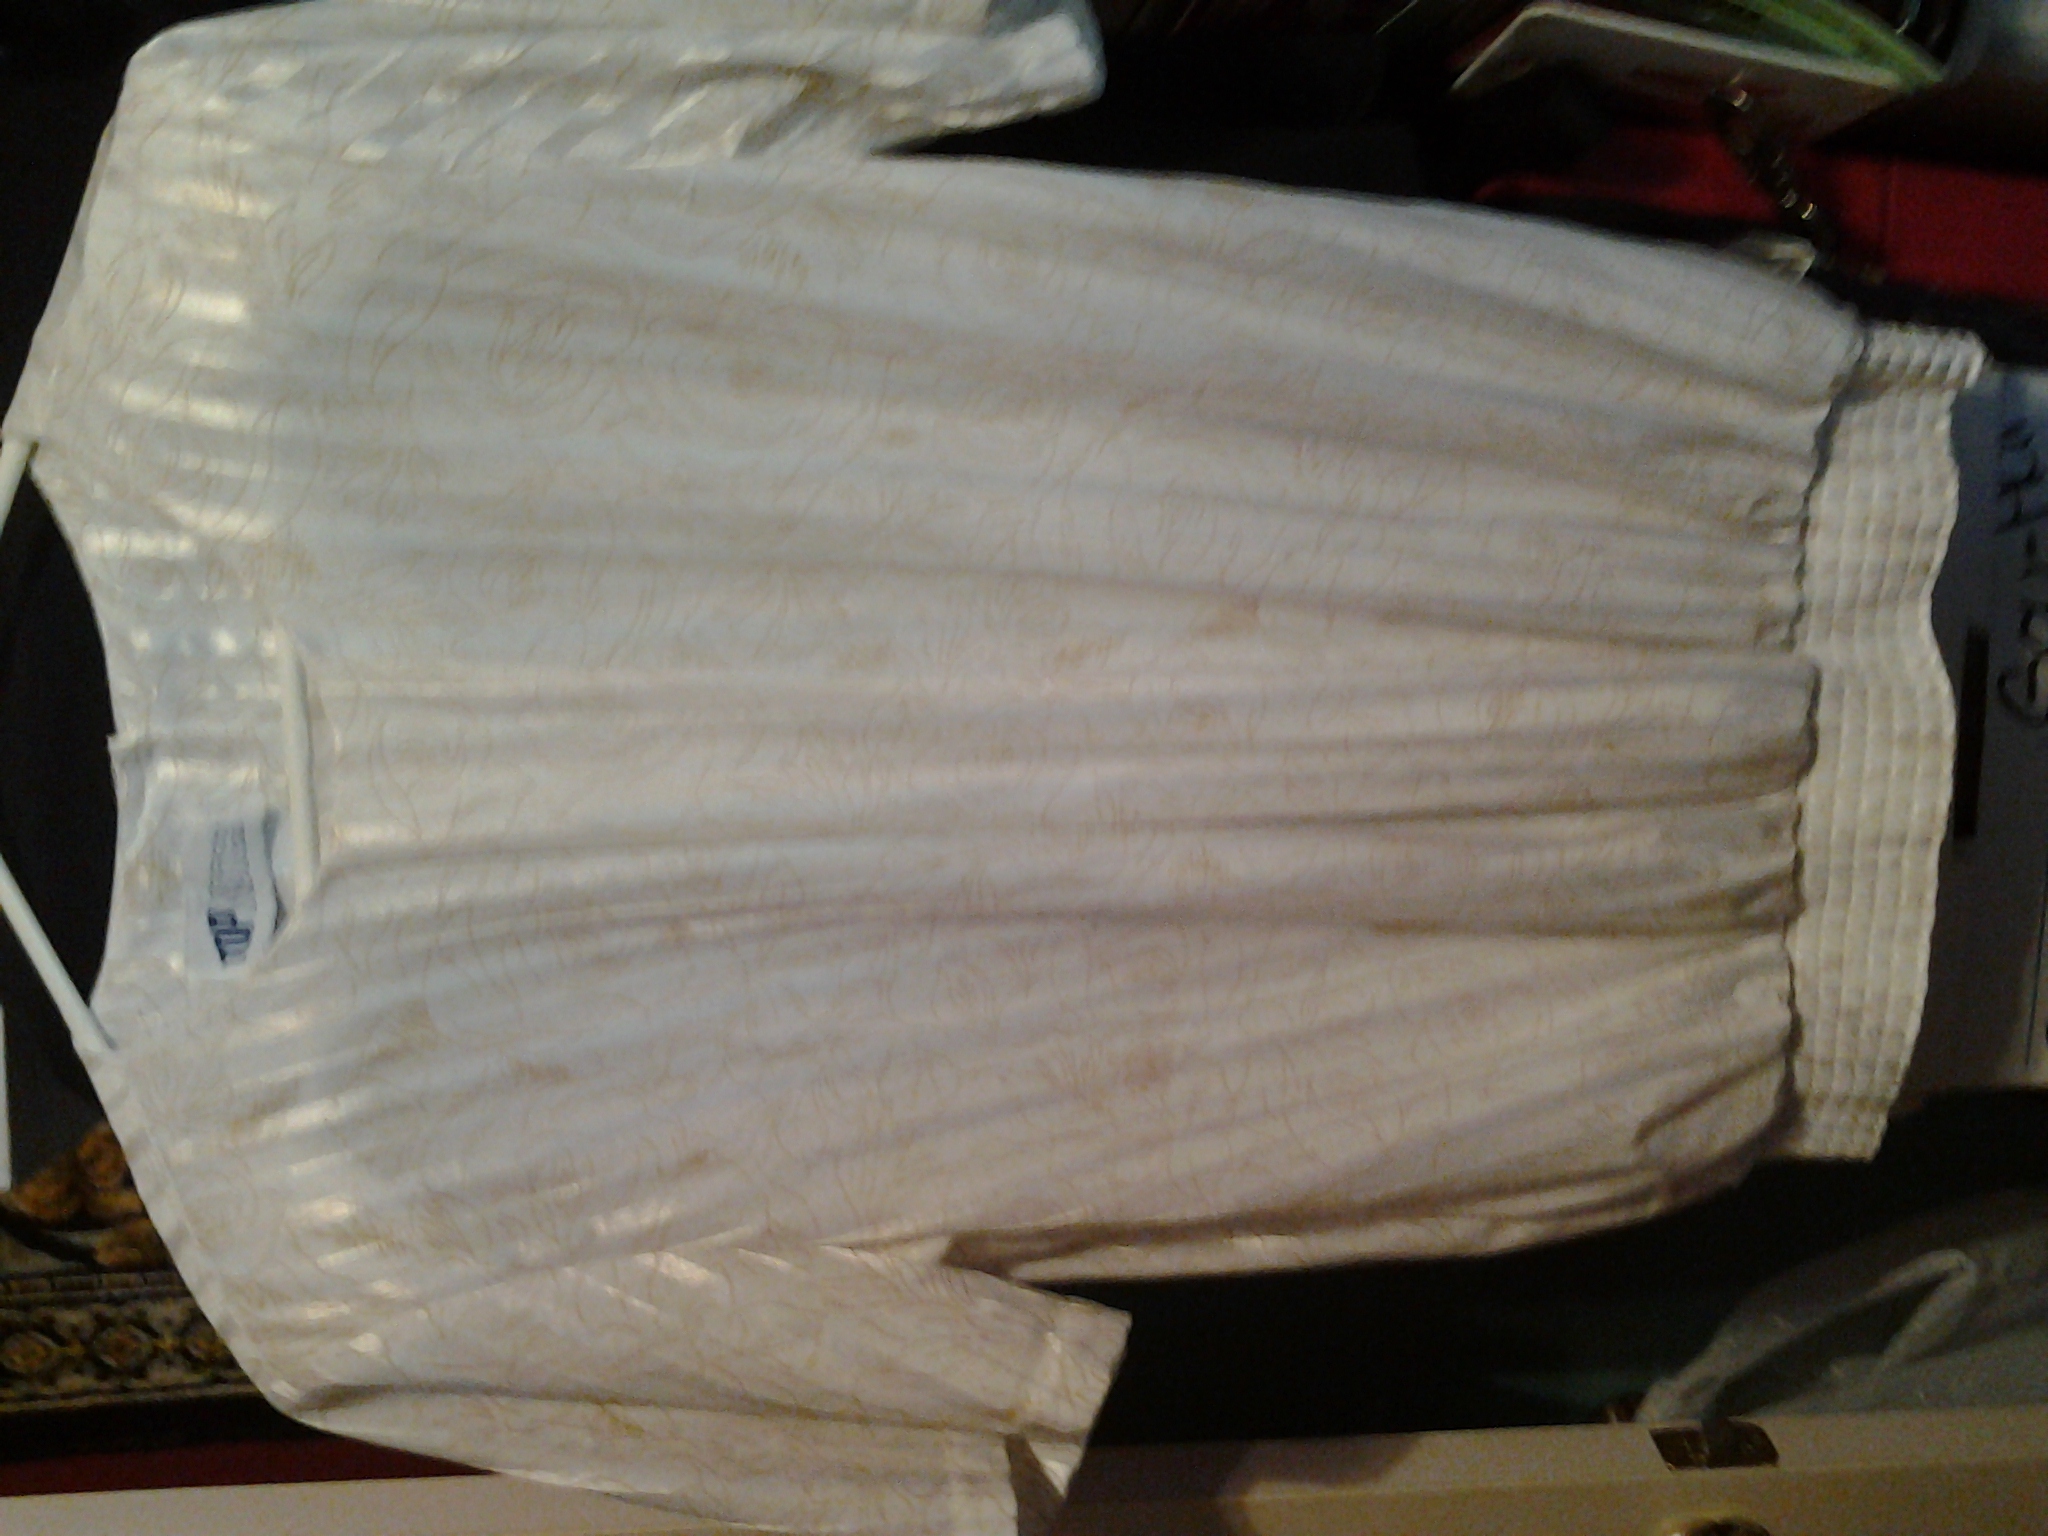 Top Notch Women\'s Blouse, Size M in PeightonsPlace's Garage Sale Dover, FL